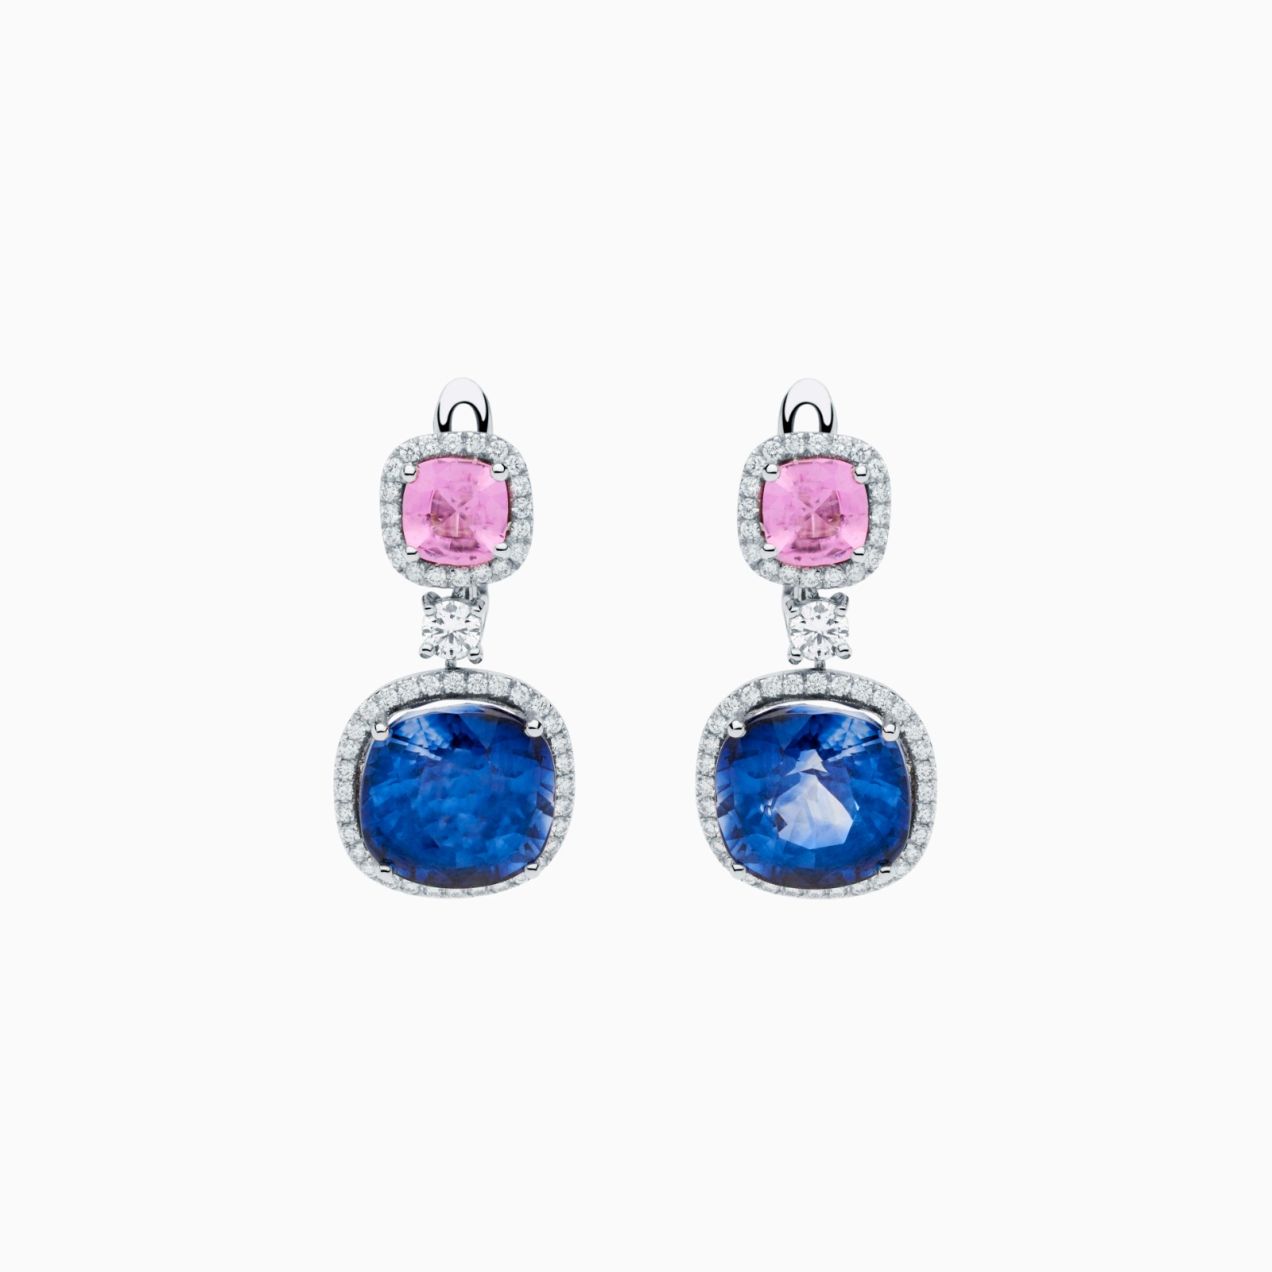 White gold earrings with blue sapphiros and pink sapphires